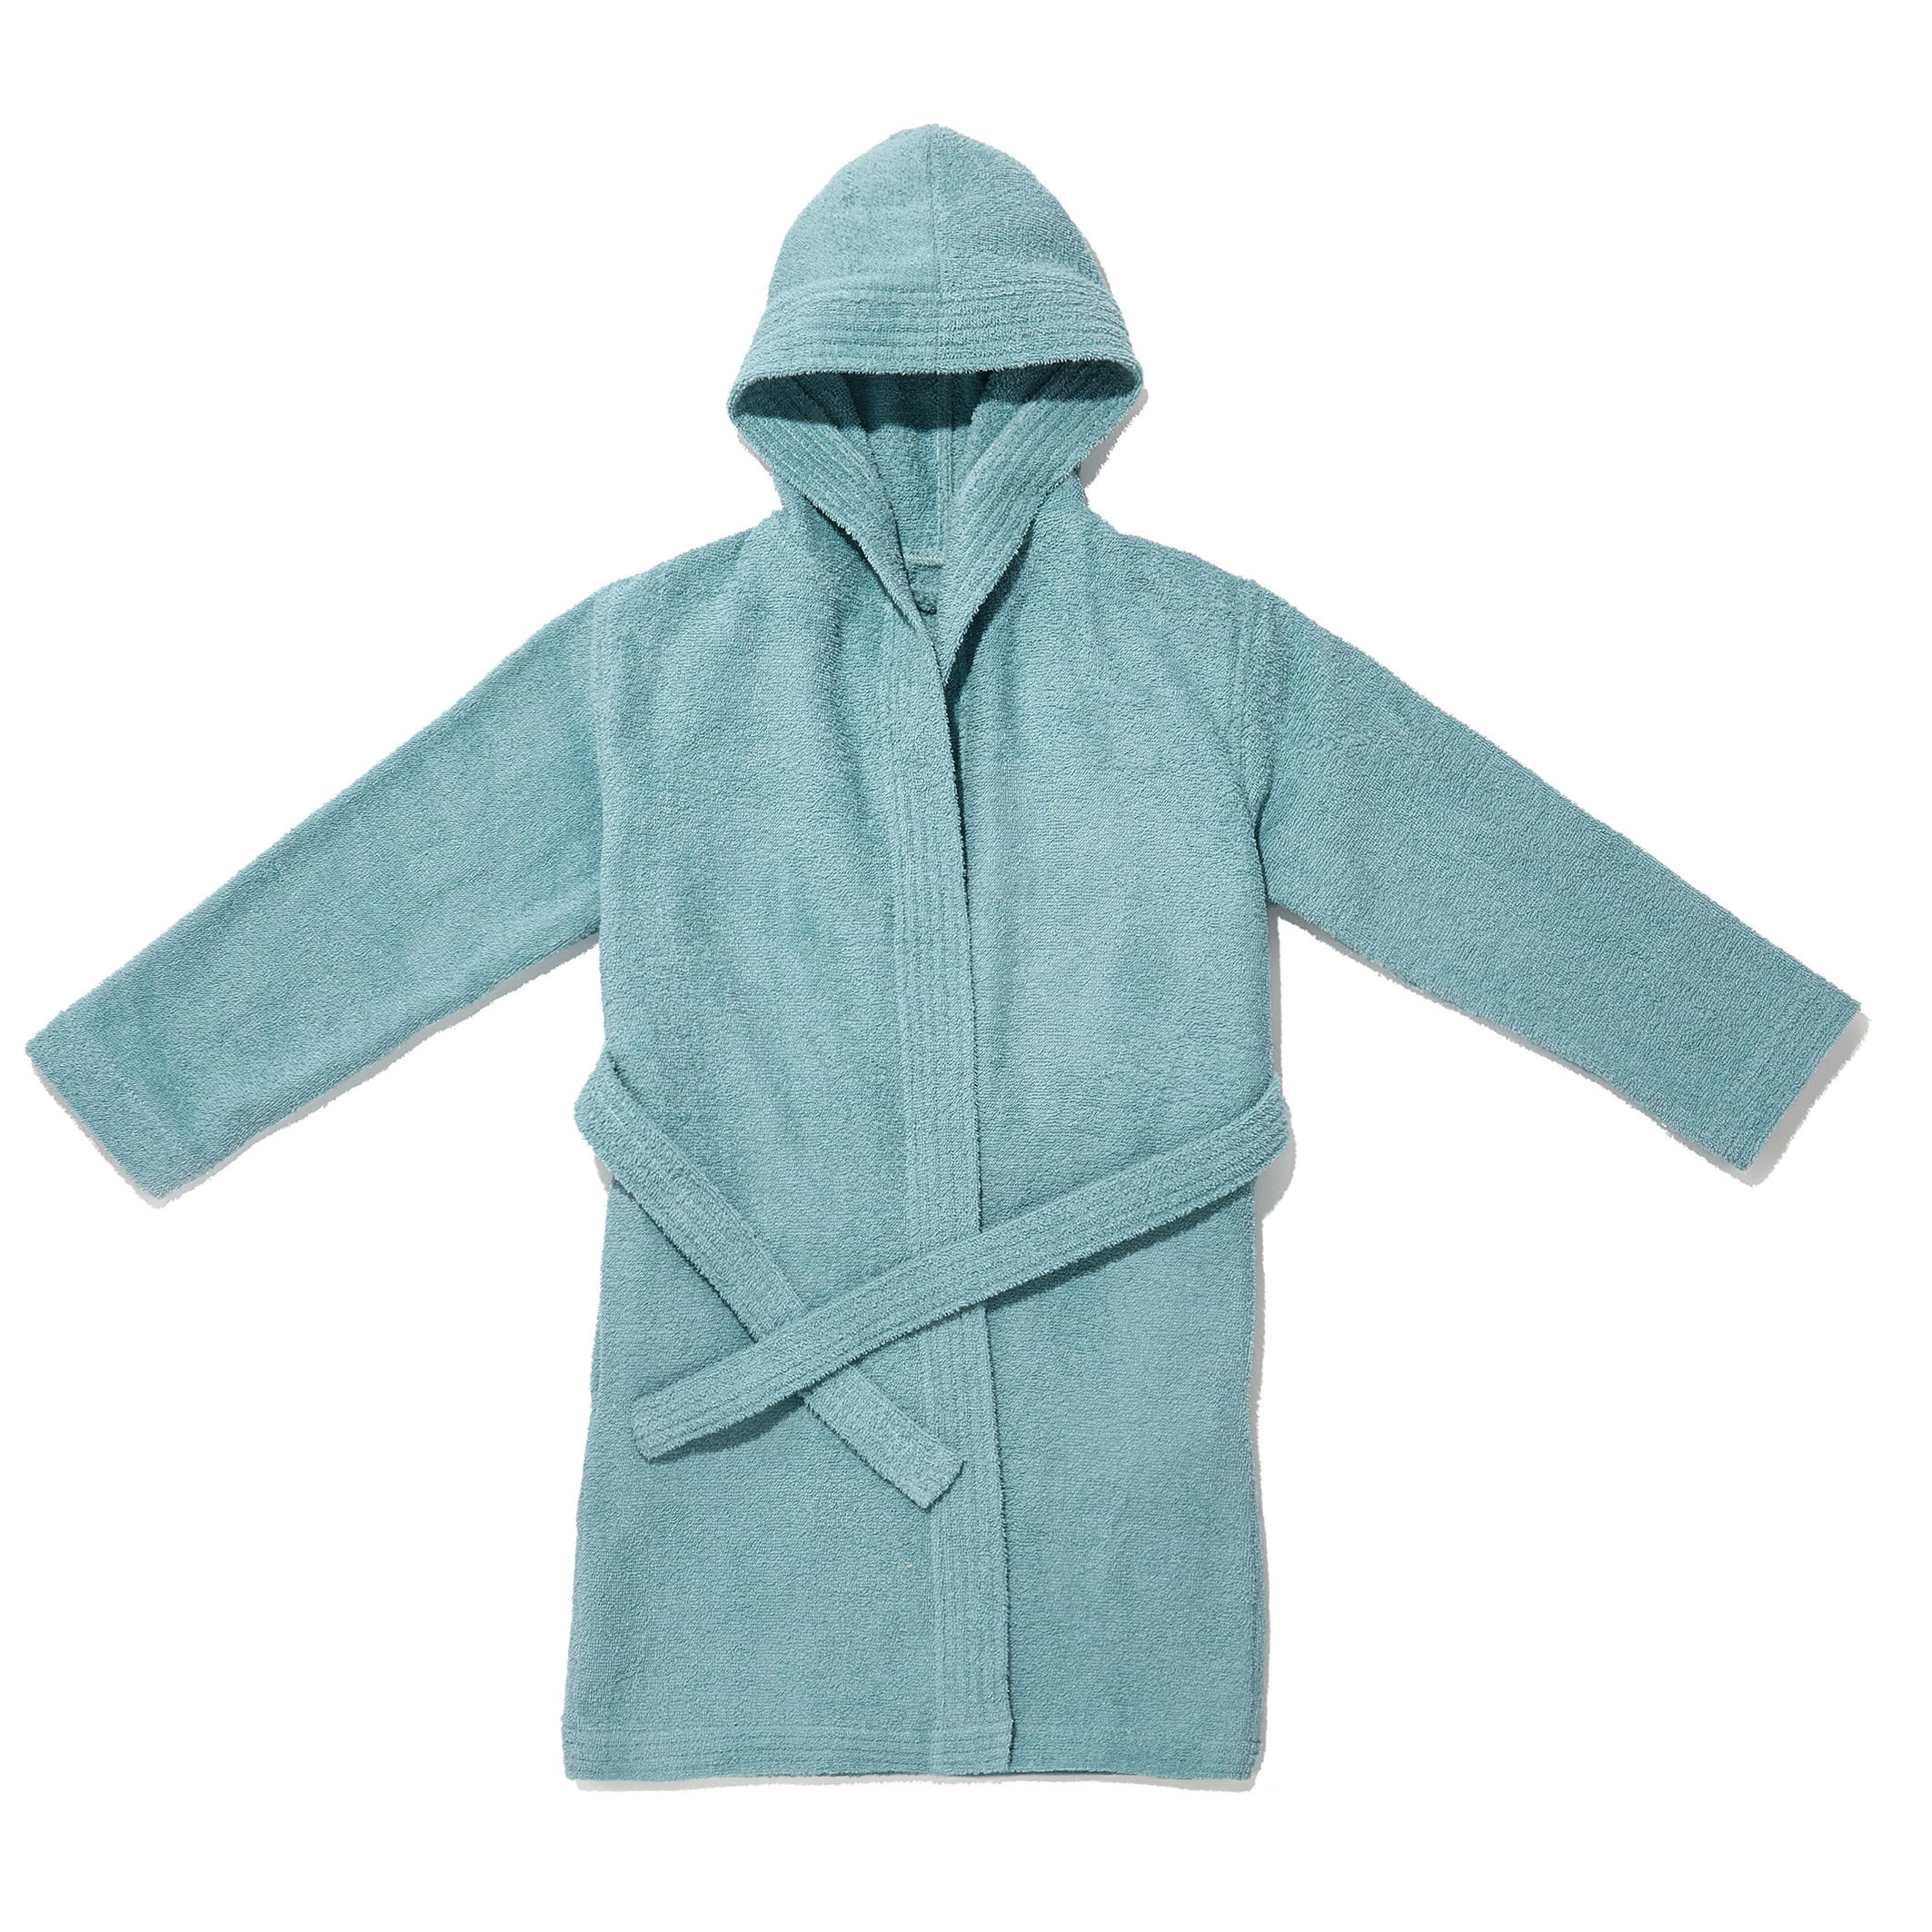 100% Cotton Oeko TEX Boys Dressing Gown with 2 Pockets Hood with Ears Free from Chemical Products Girls Dressing Gown Twinzen Bathrobe for Babies Boys